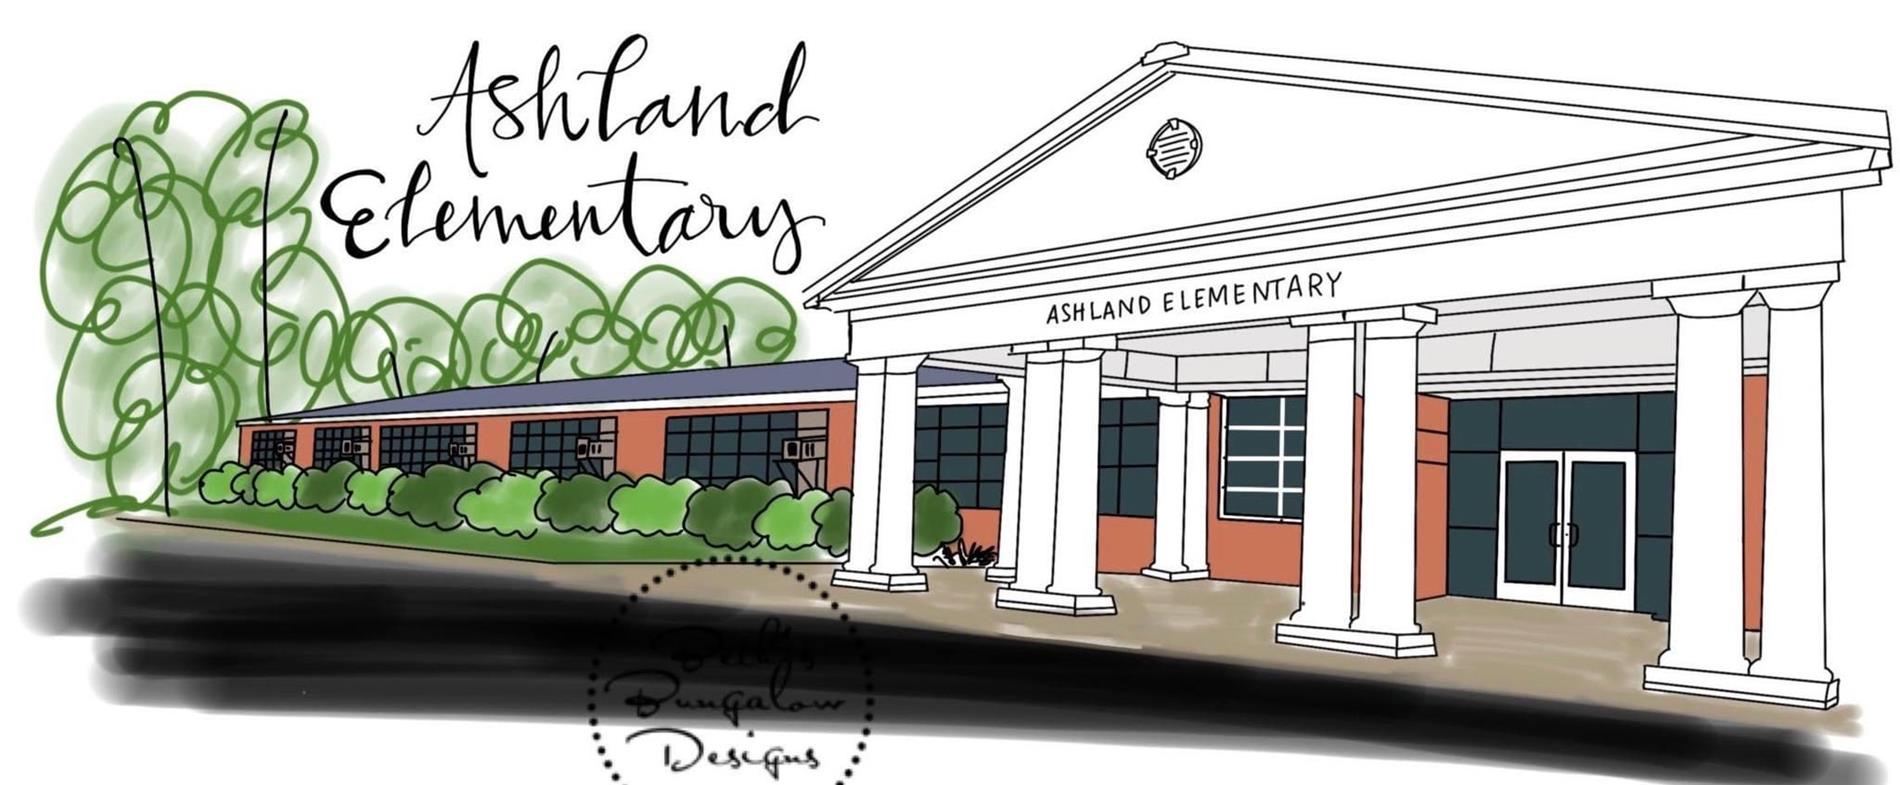 Ashland Elementary building graphic drawing